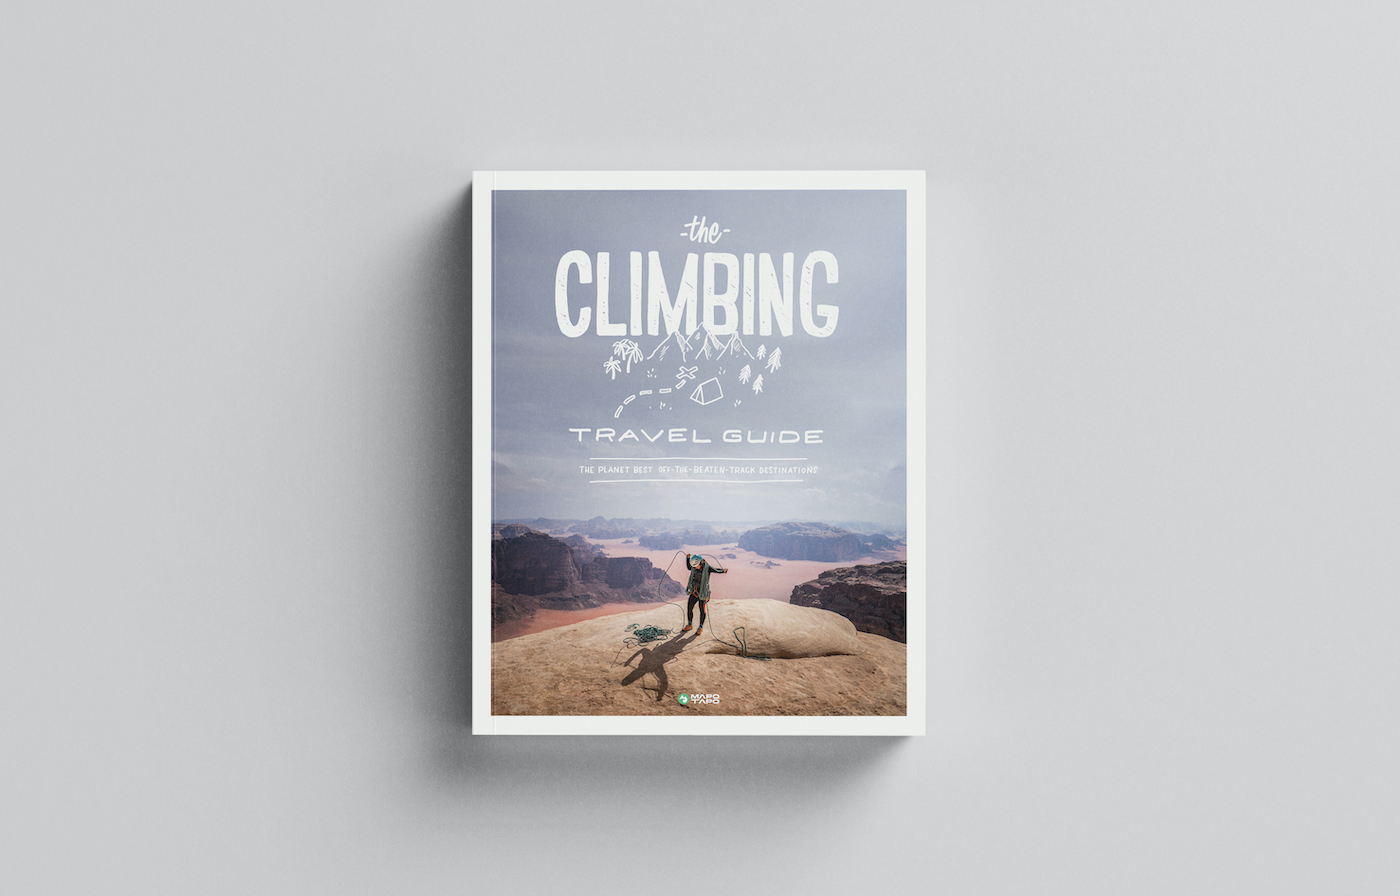 The front cover of the Climbing Travel Guide